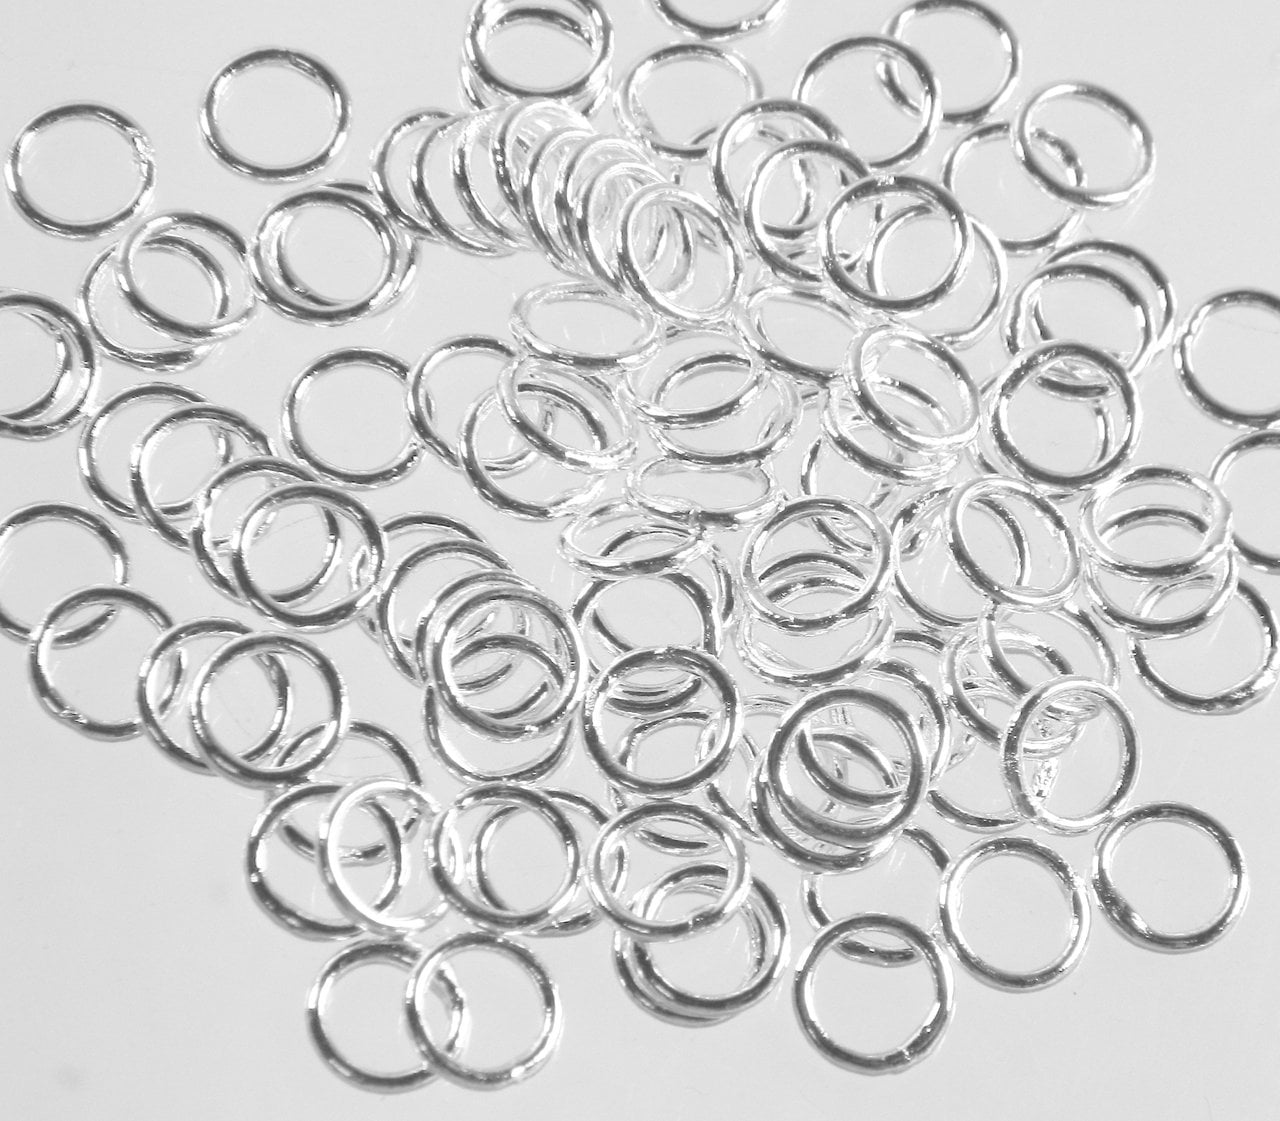 100 Silver Plated Open Jump Rings 18 Gauge 5mm 5.5mm 6mm 7mm 8mm 10mm & 12mm 